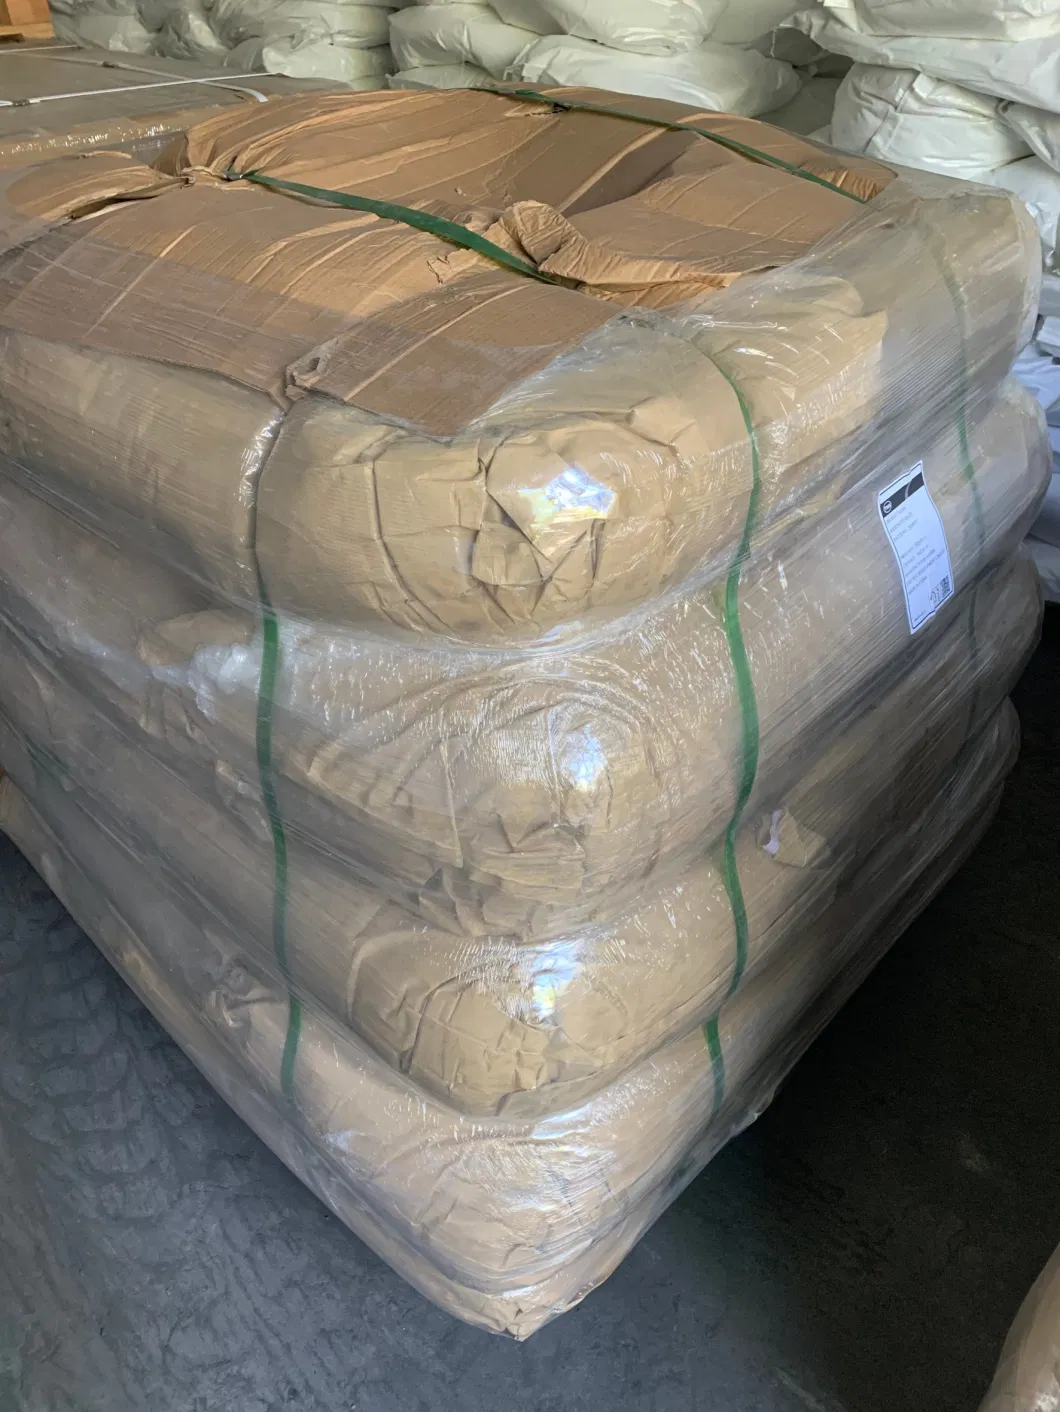 Quick Shipment Chinese Top Popular High Quality Sodium Stearate